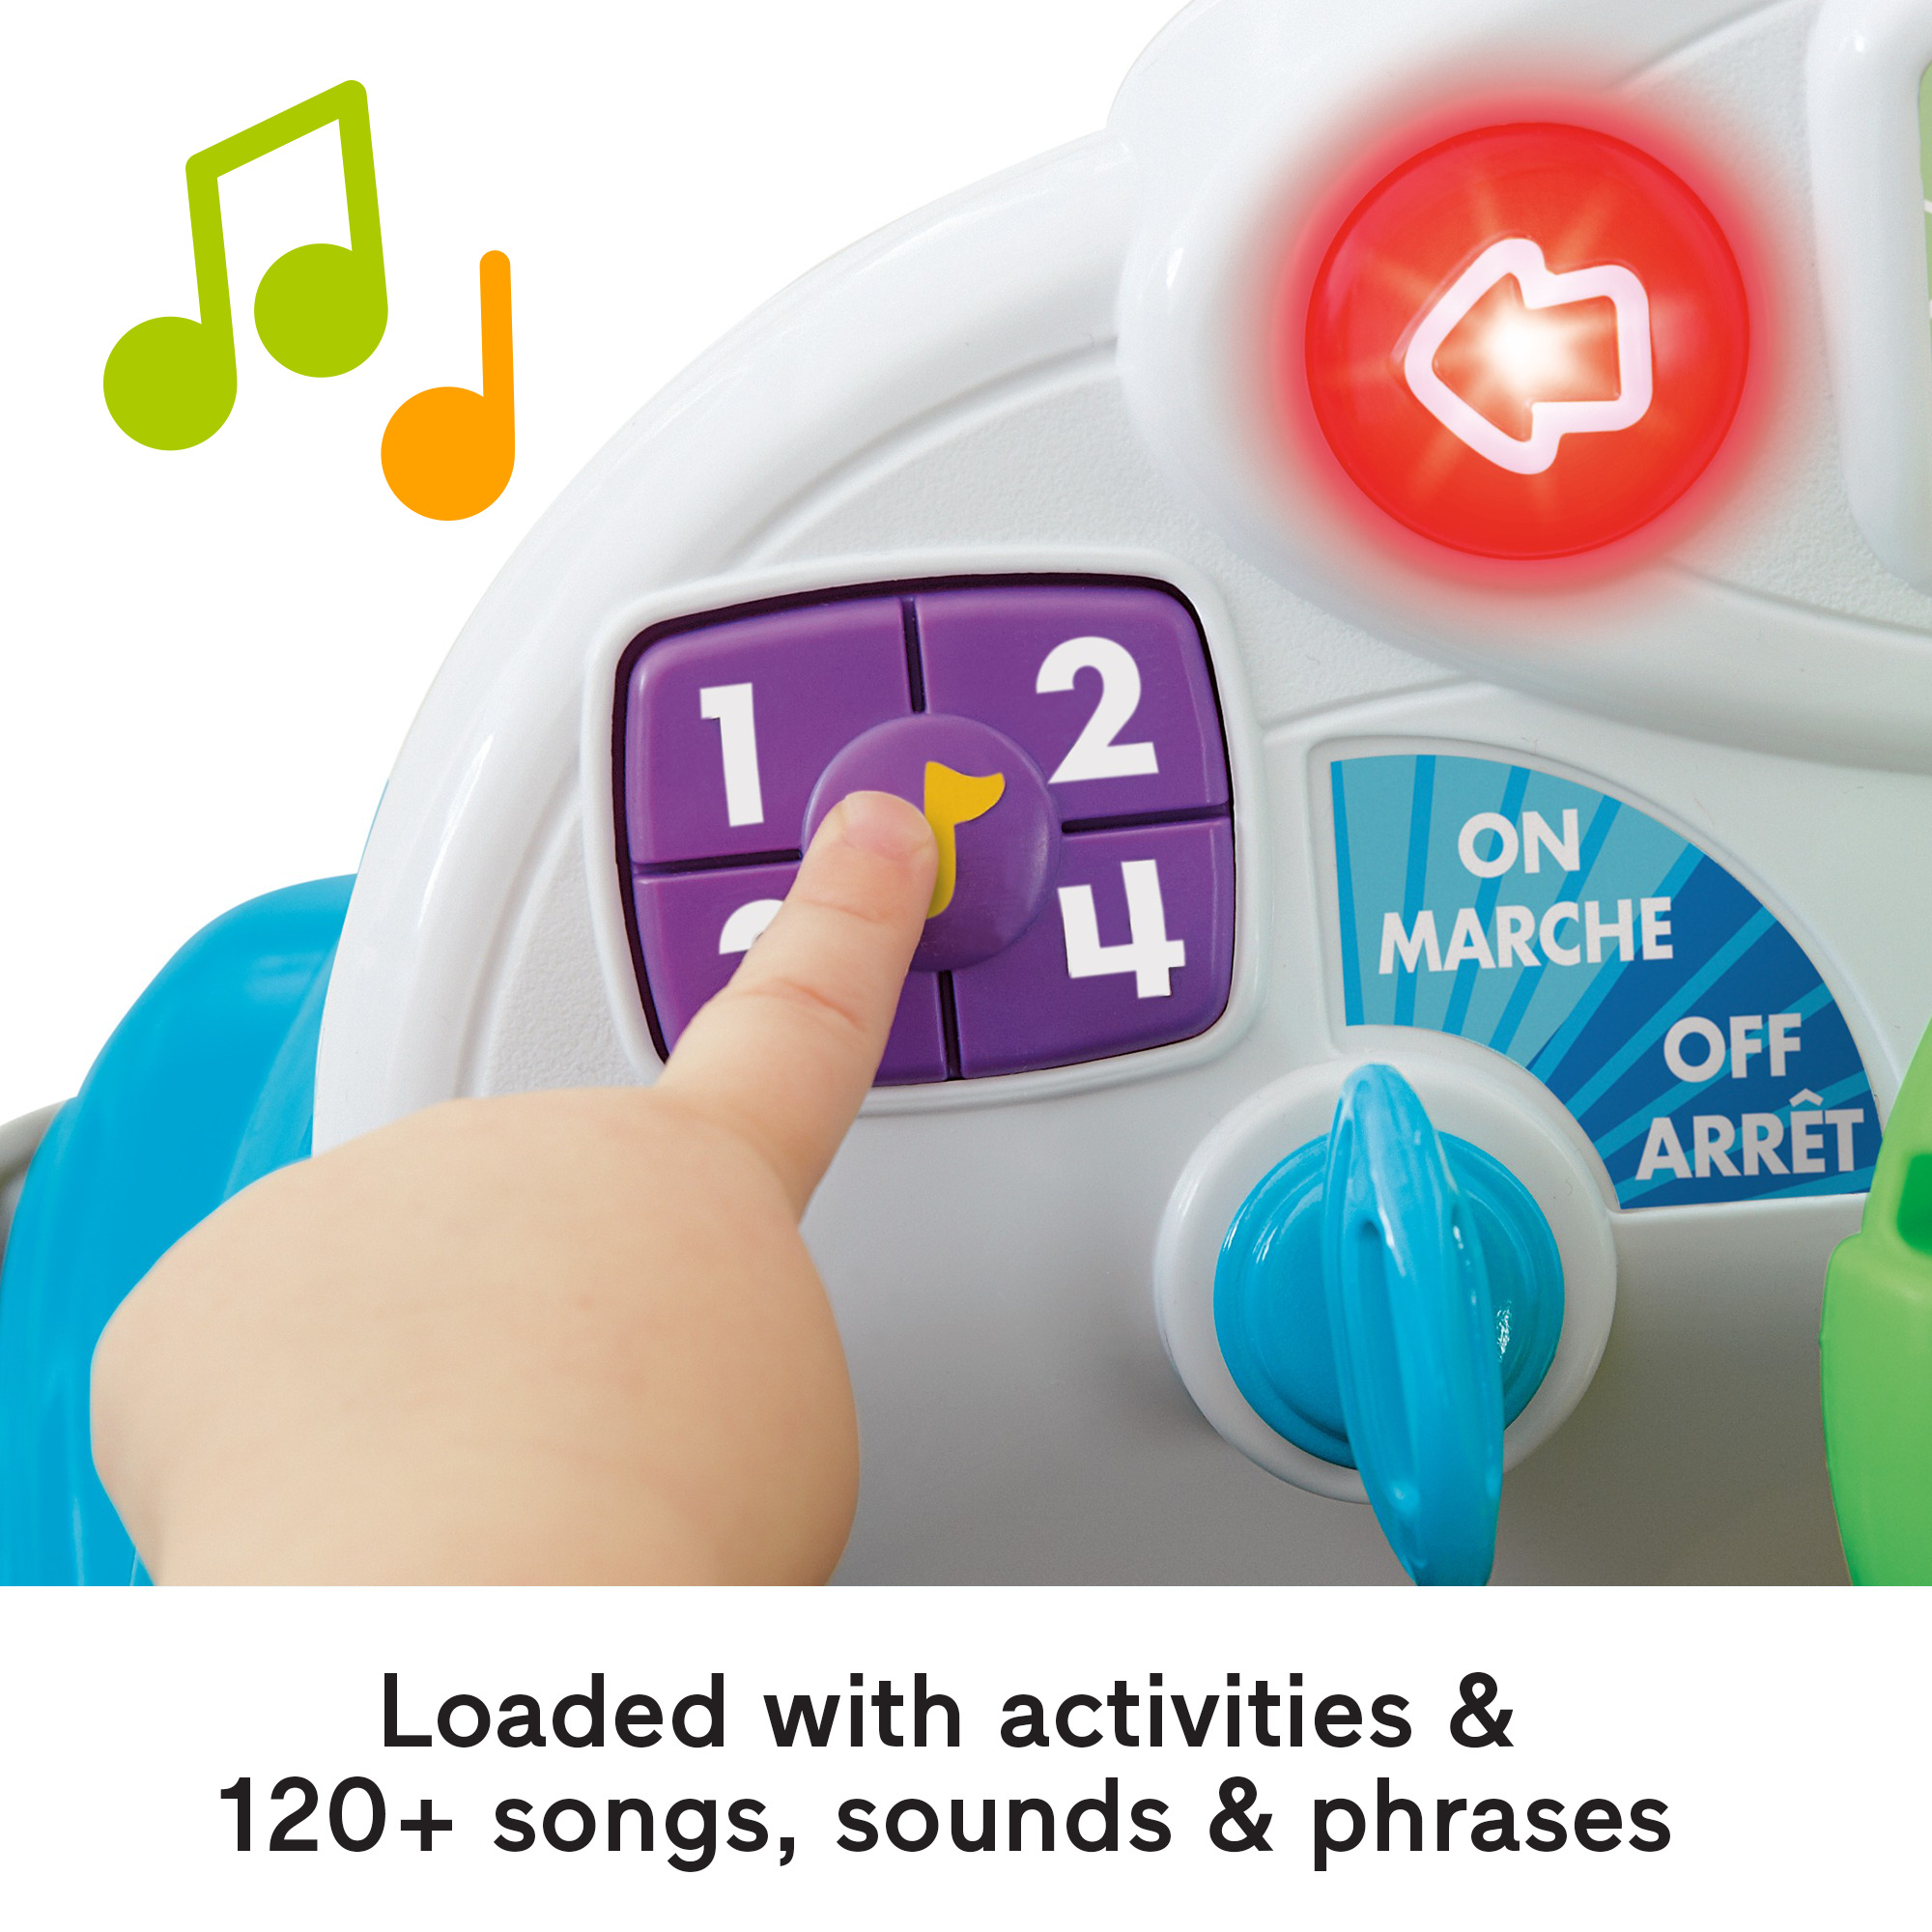 Fisher-Price Laugh & Learn Crawl Around Car, Electronic Learning Toy Activity Center for Baby, Blue - image 5 of 7